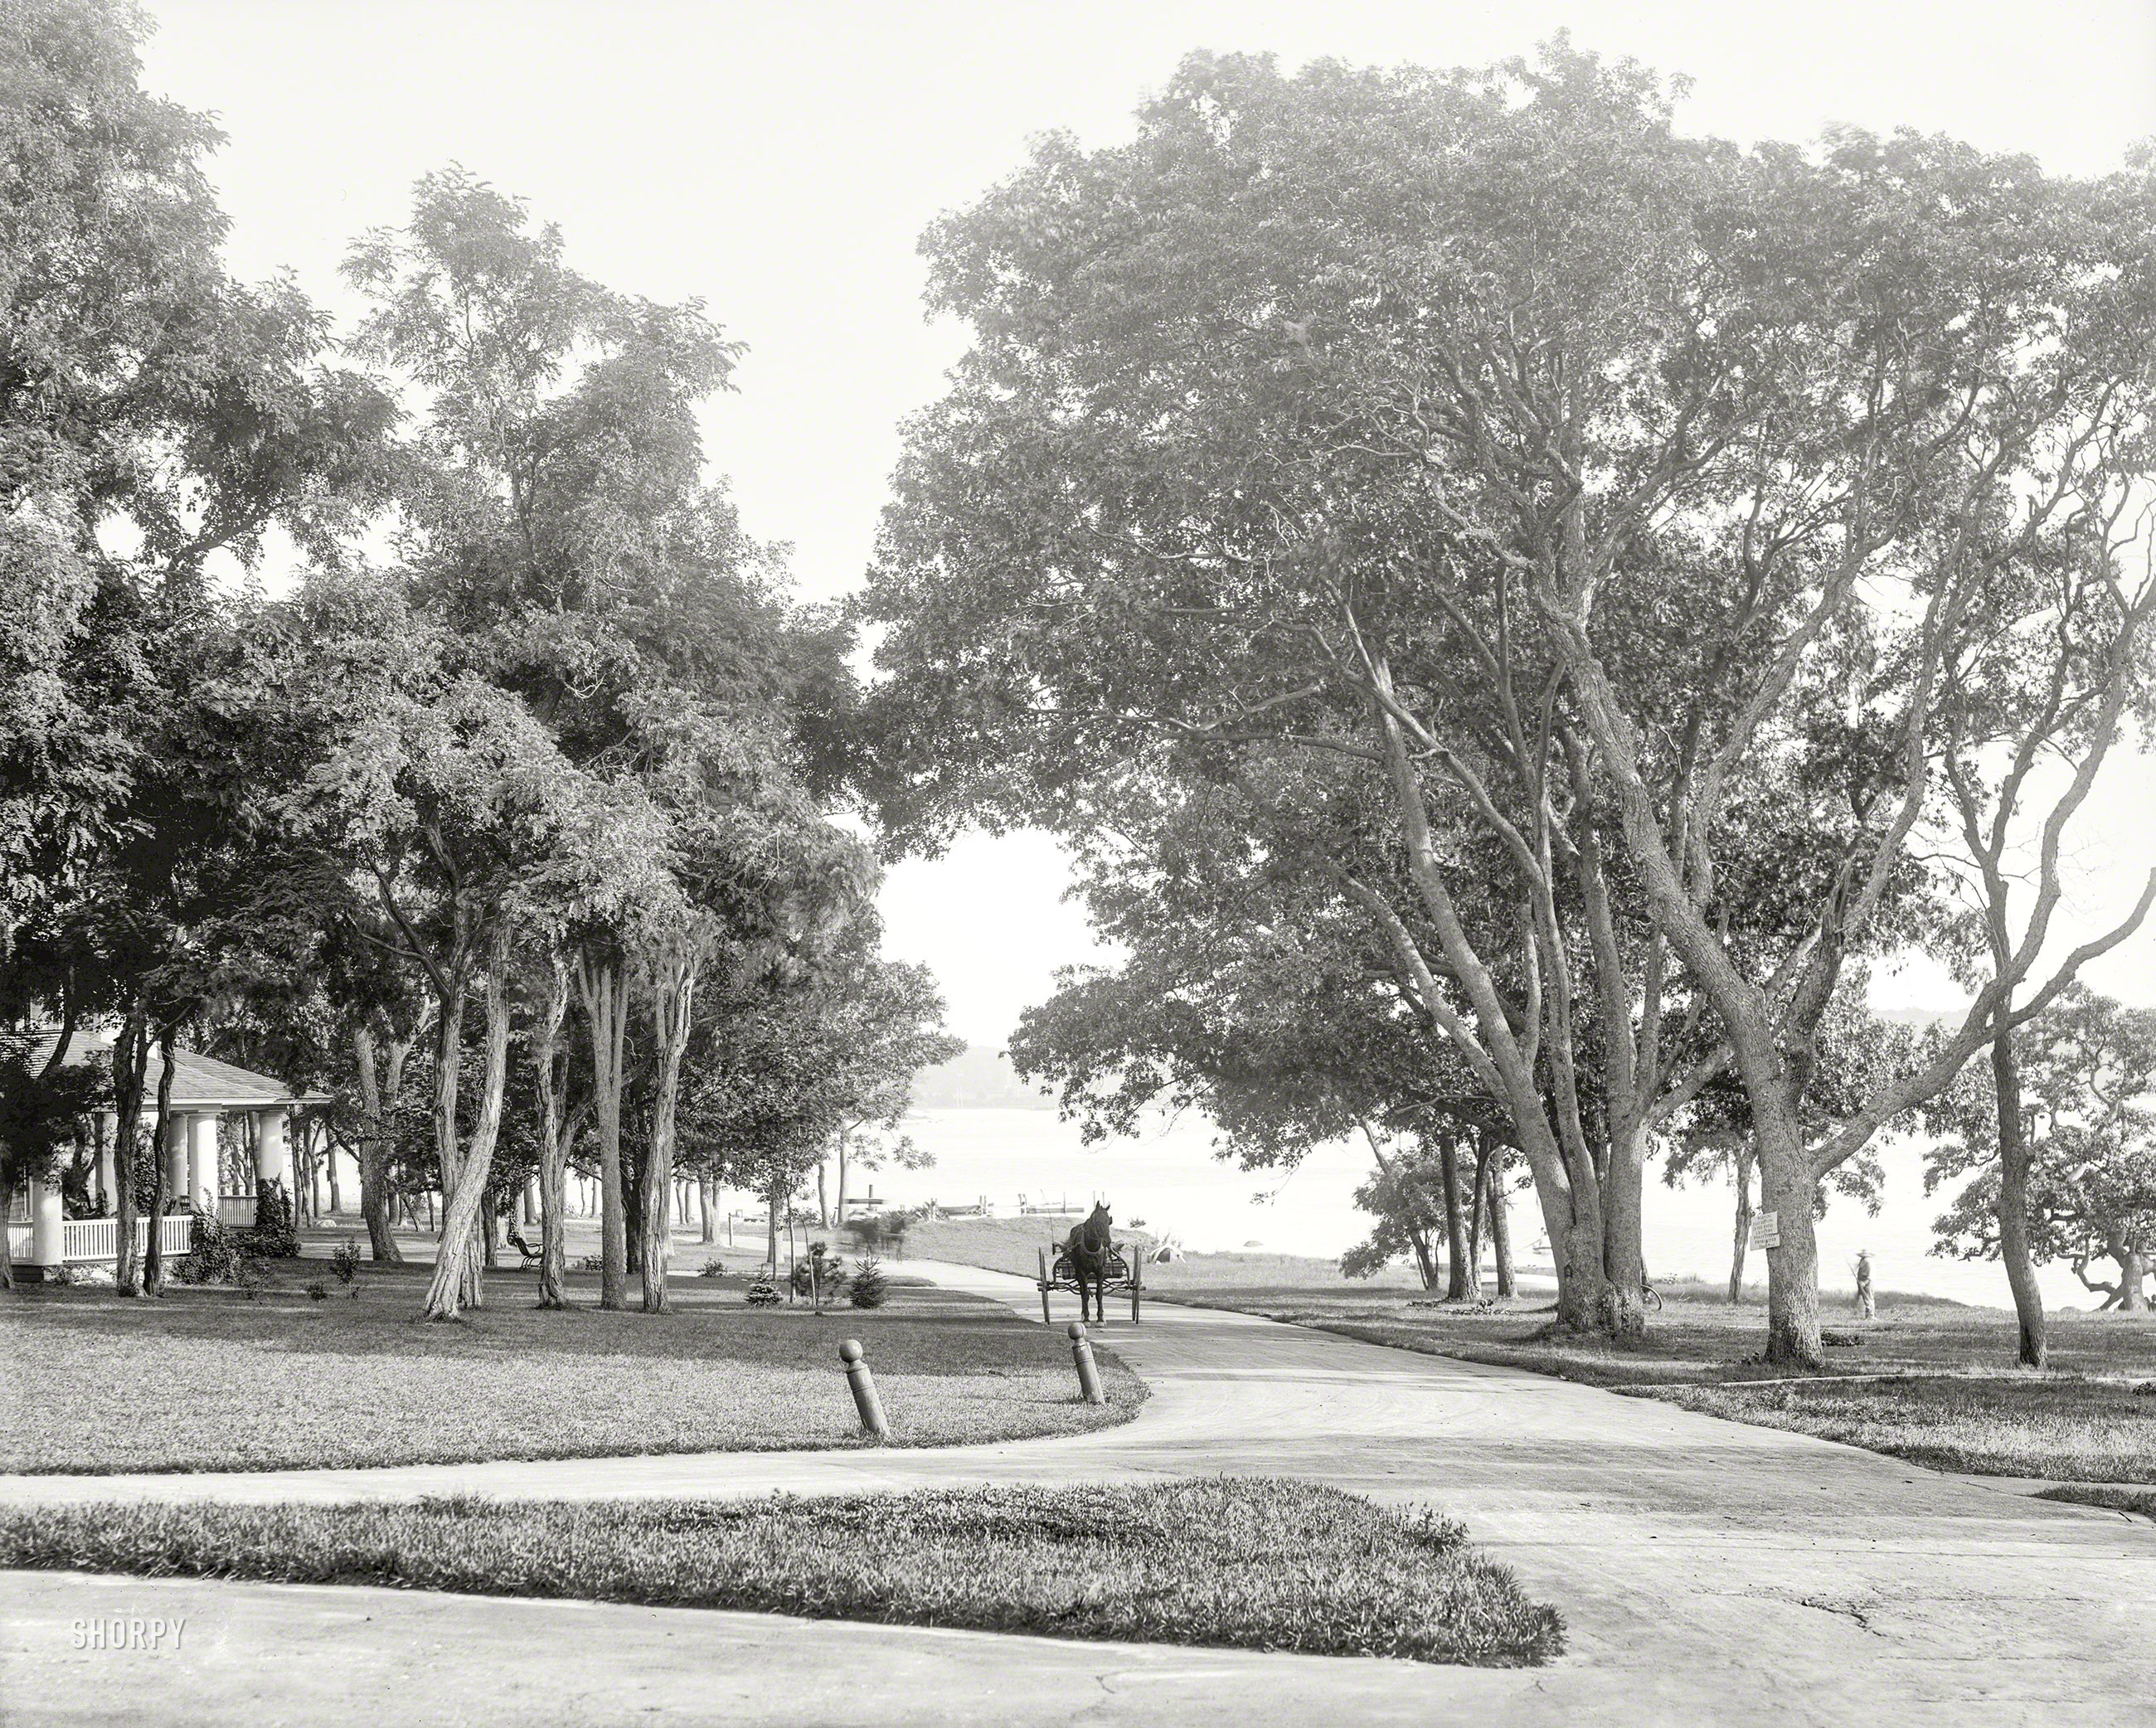 Circa 1904. "Sylvester Avenue, Manhanset Manor, Shelter Island, N.Y." 8x10 inch dry plate glass negative, Detroit Photographic Company. View full size.